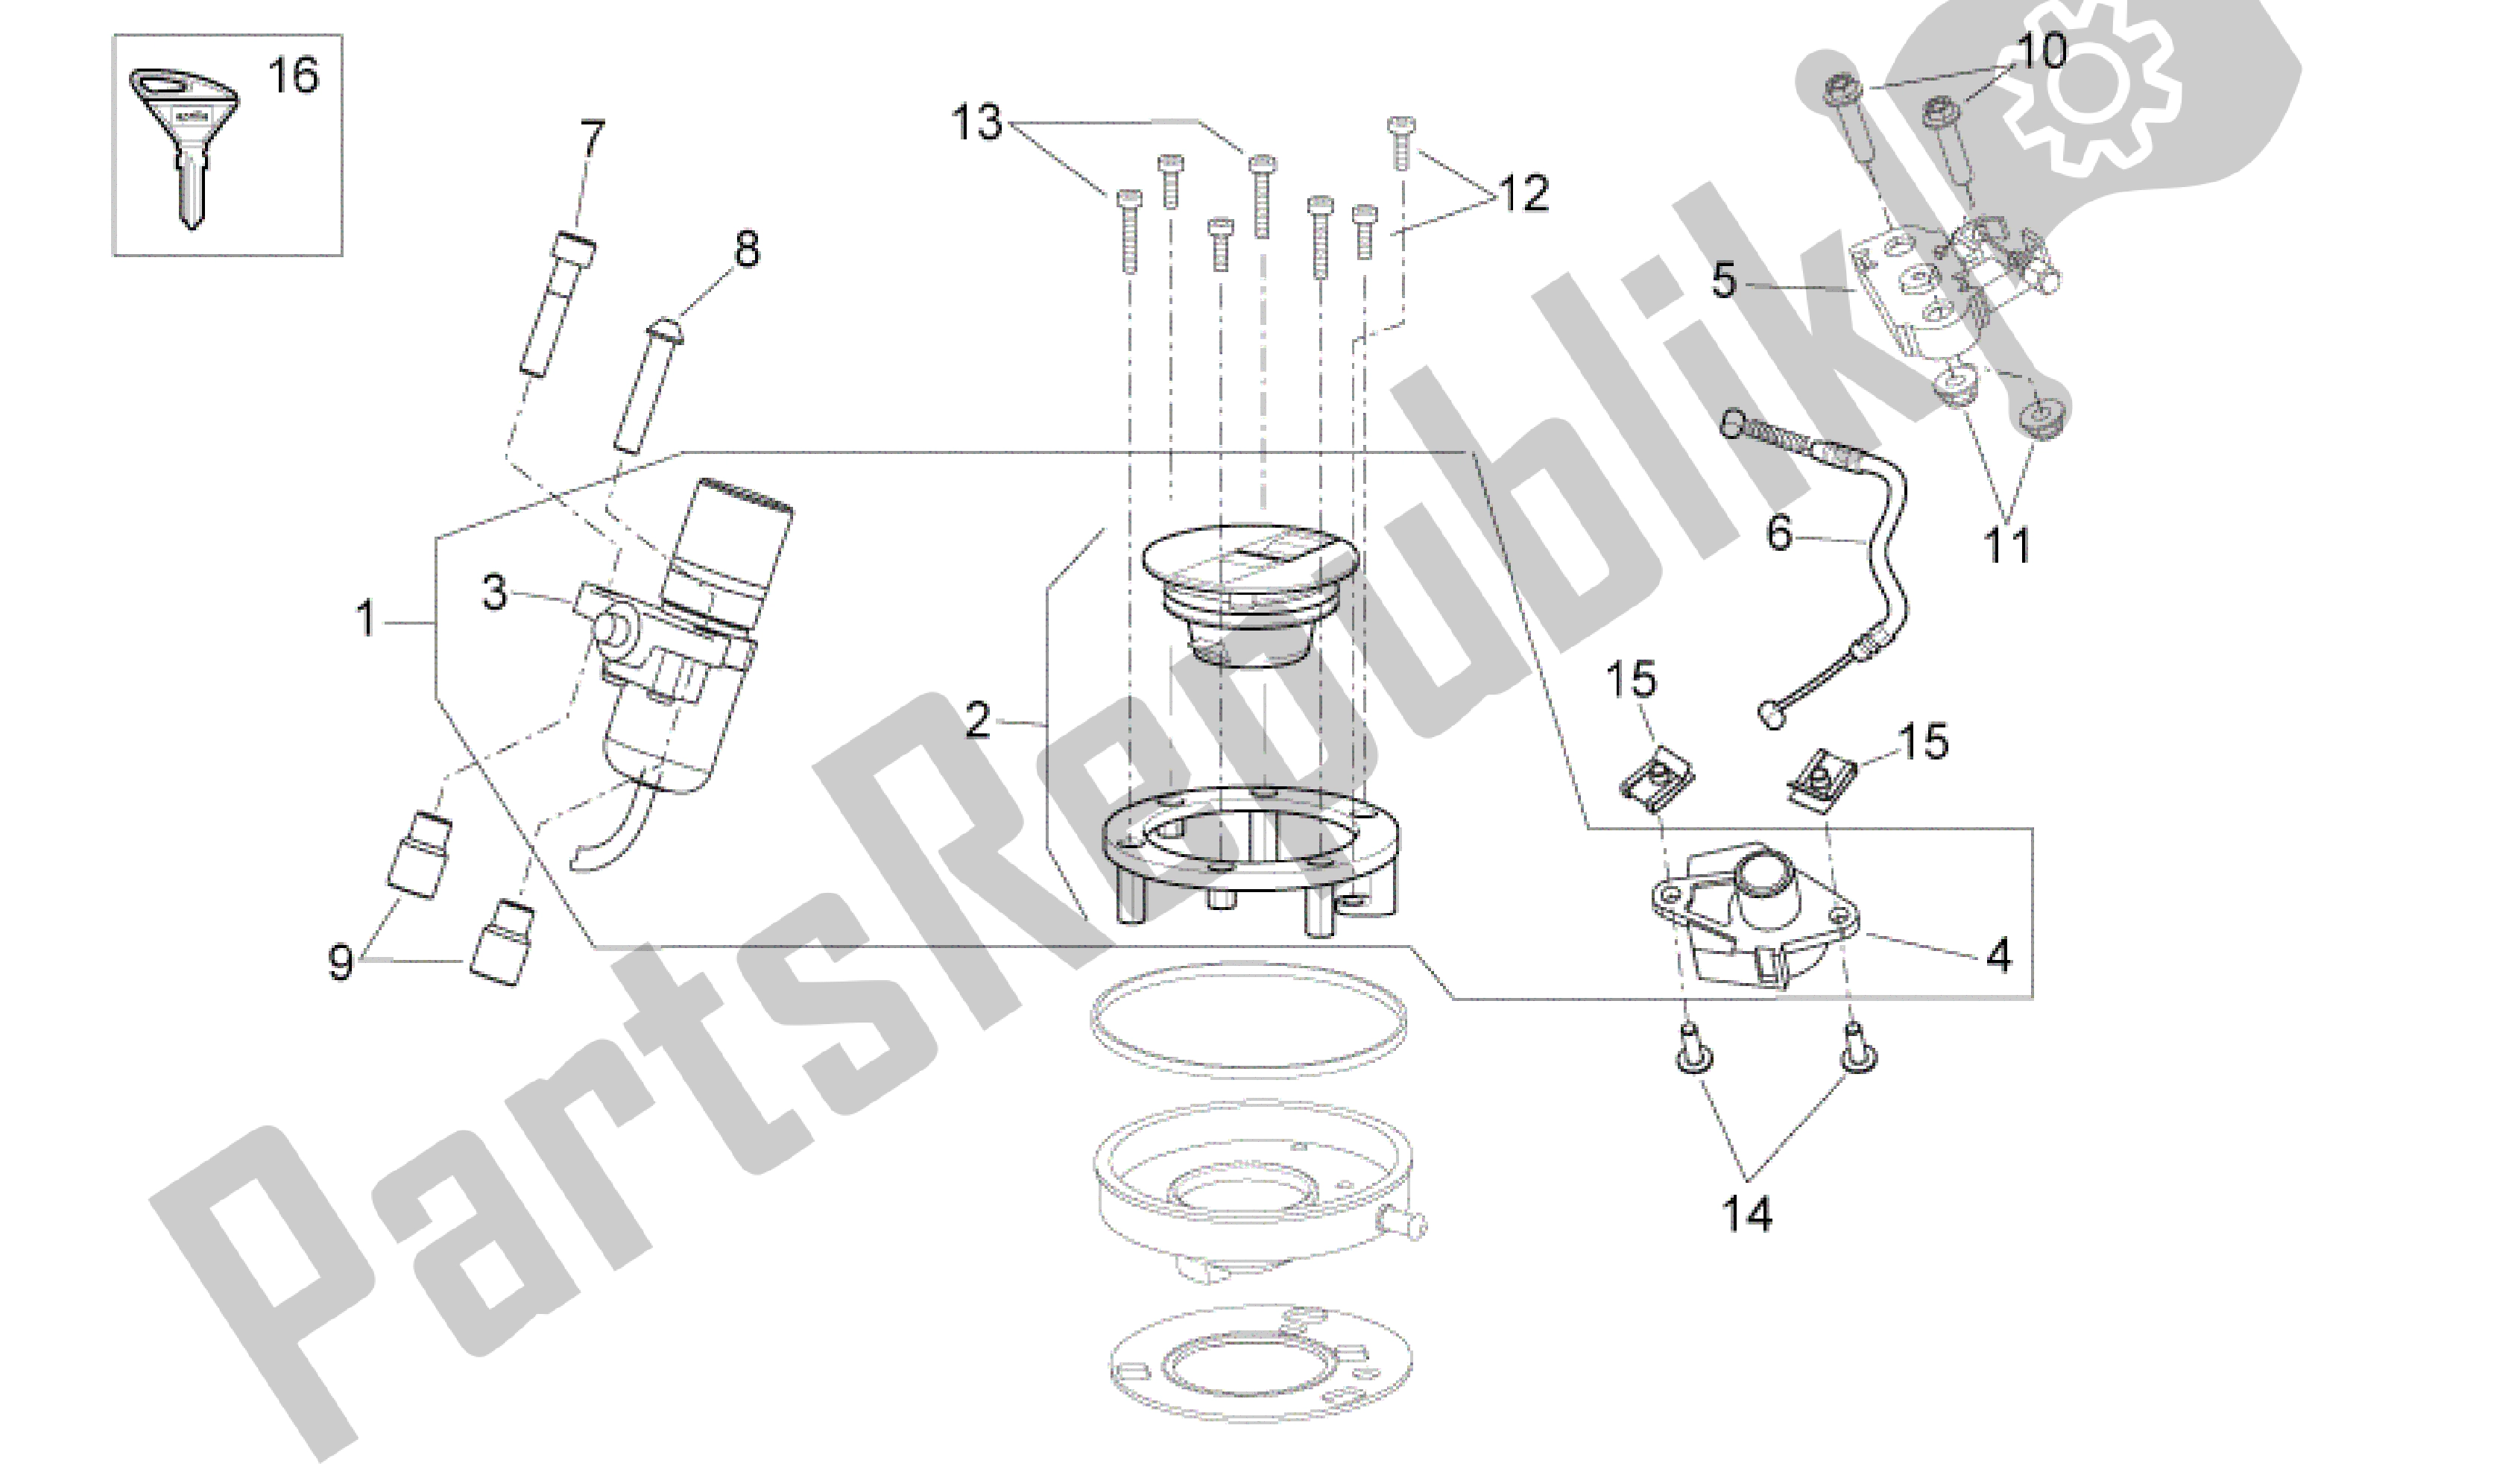 All parts for the Lock Hardware Kit of the Aprilia Shiver 750 2007 - 2009